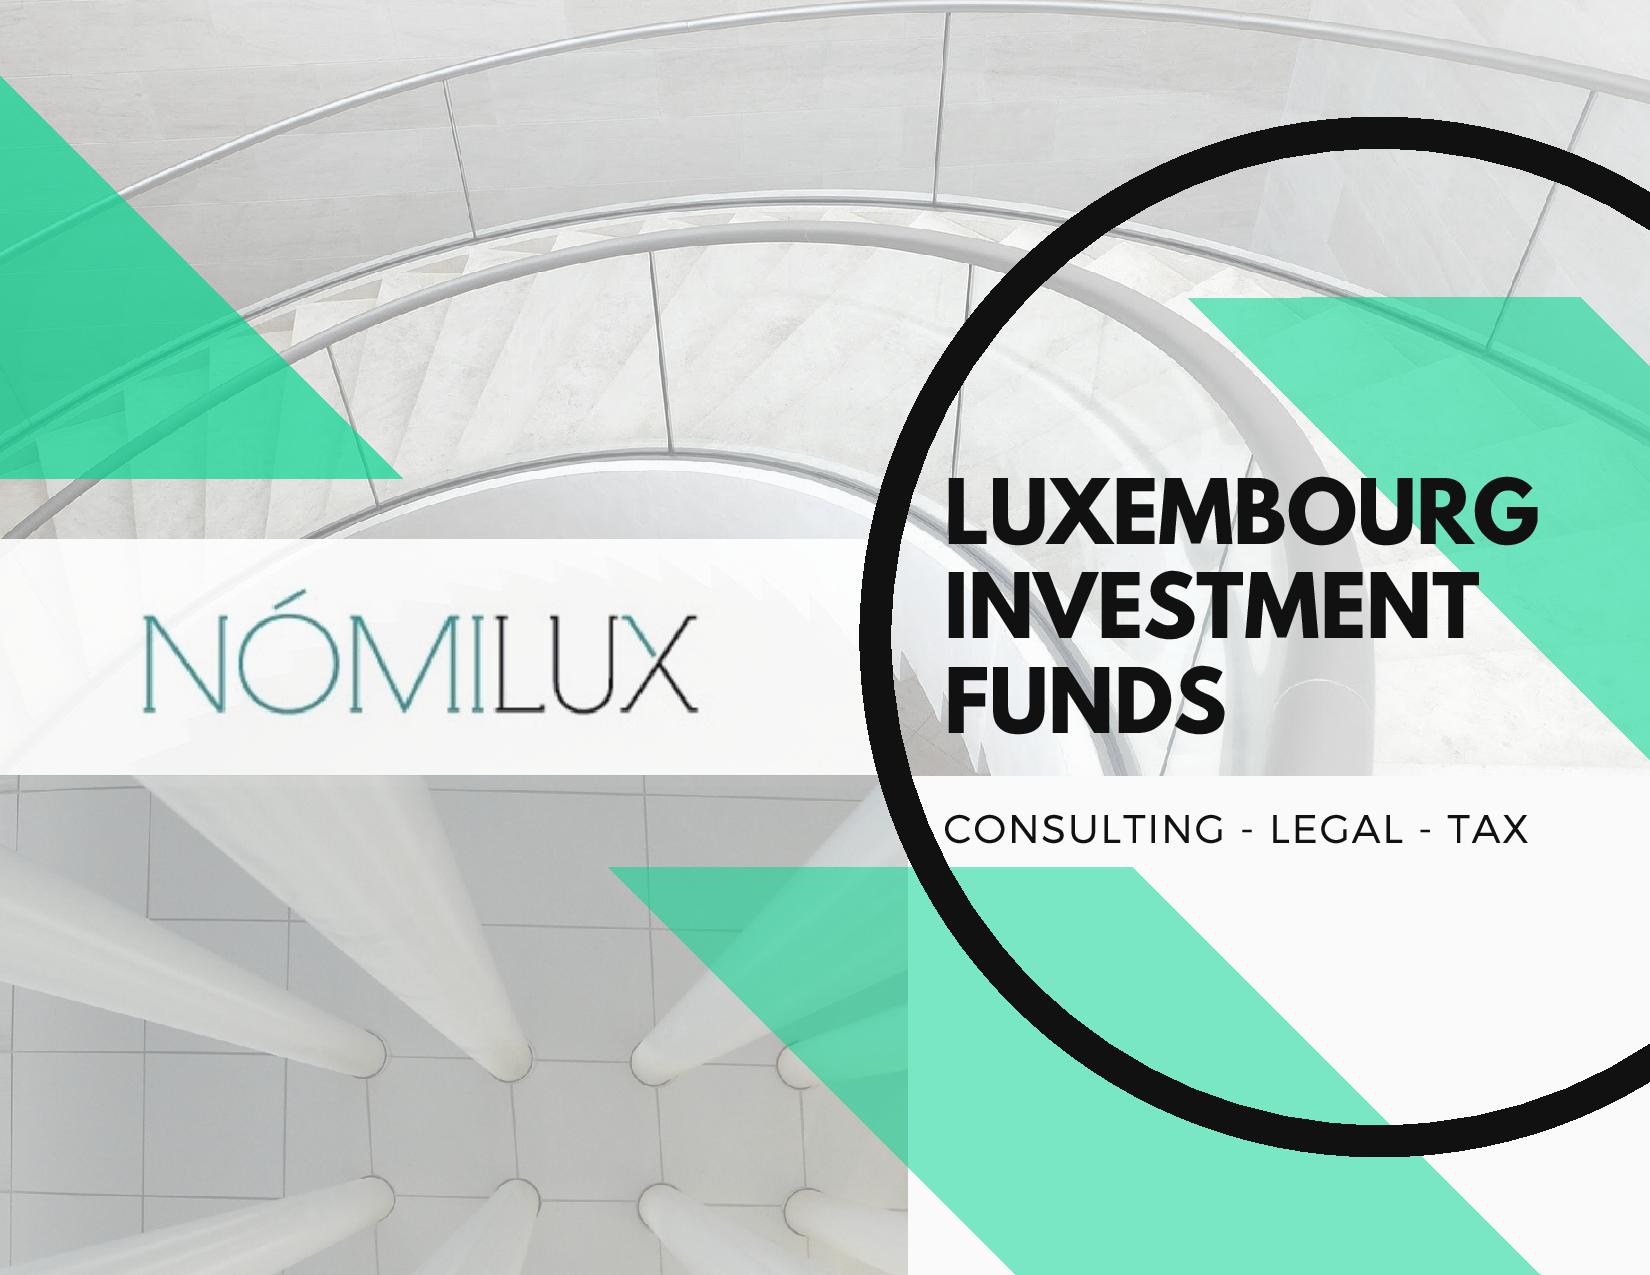 Luxembourg Investment Funds | Nomilux